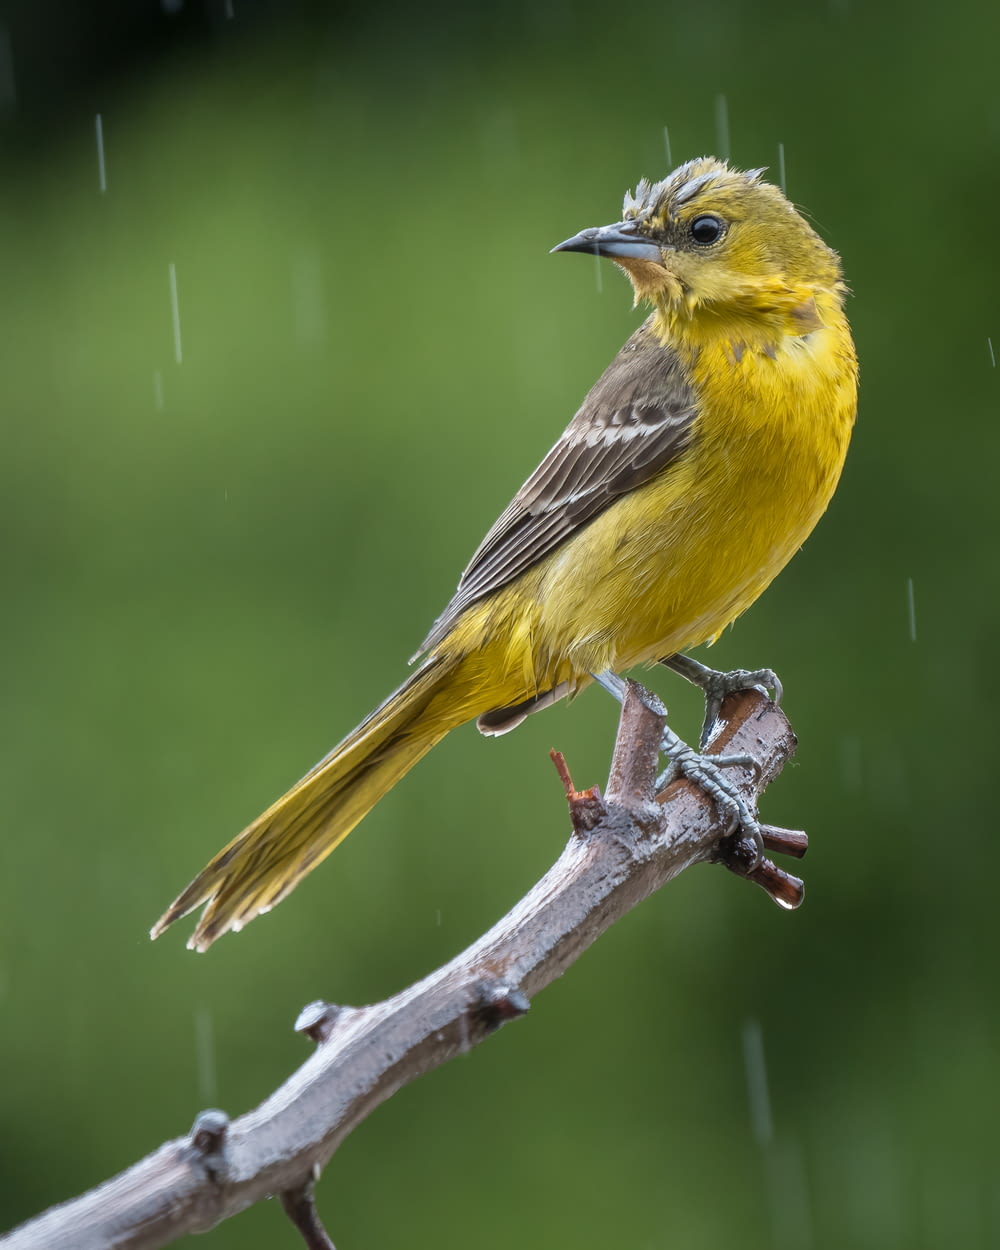 a yellow bird sitting on a branch in the rain